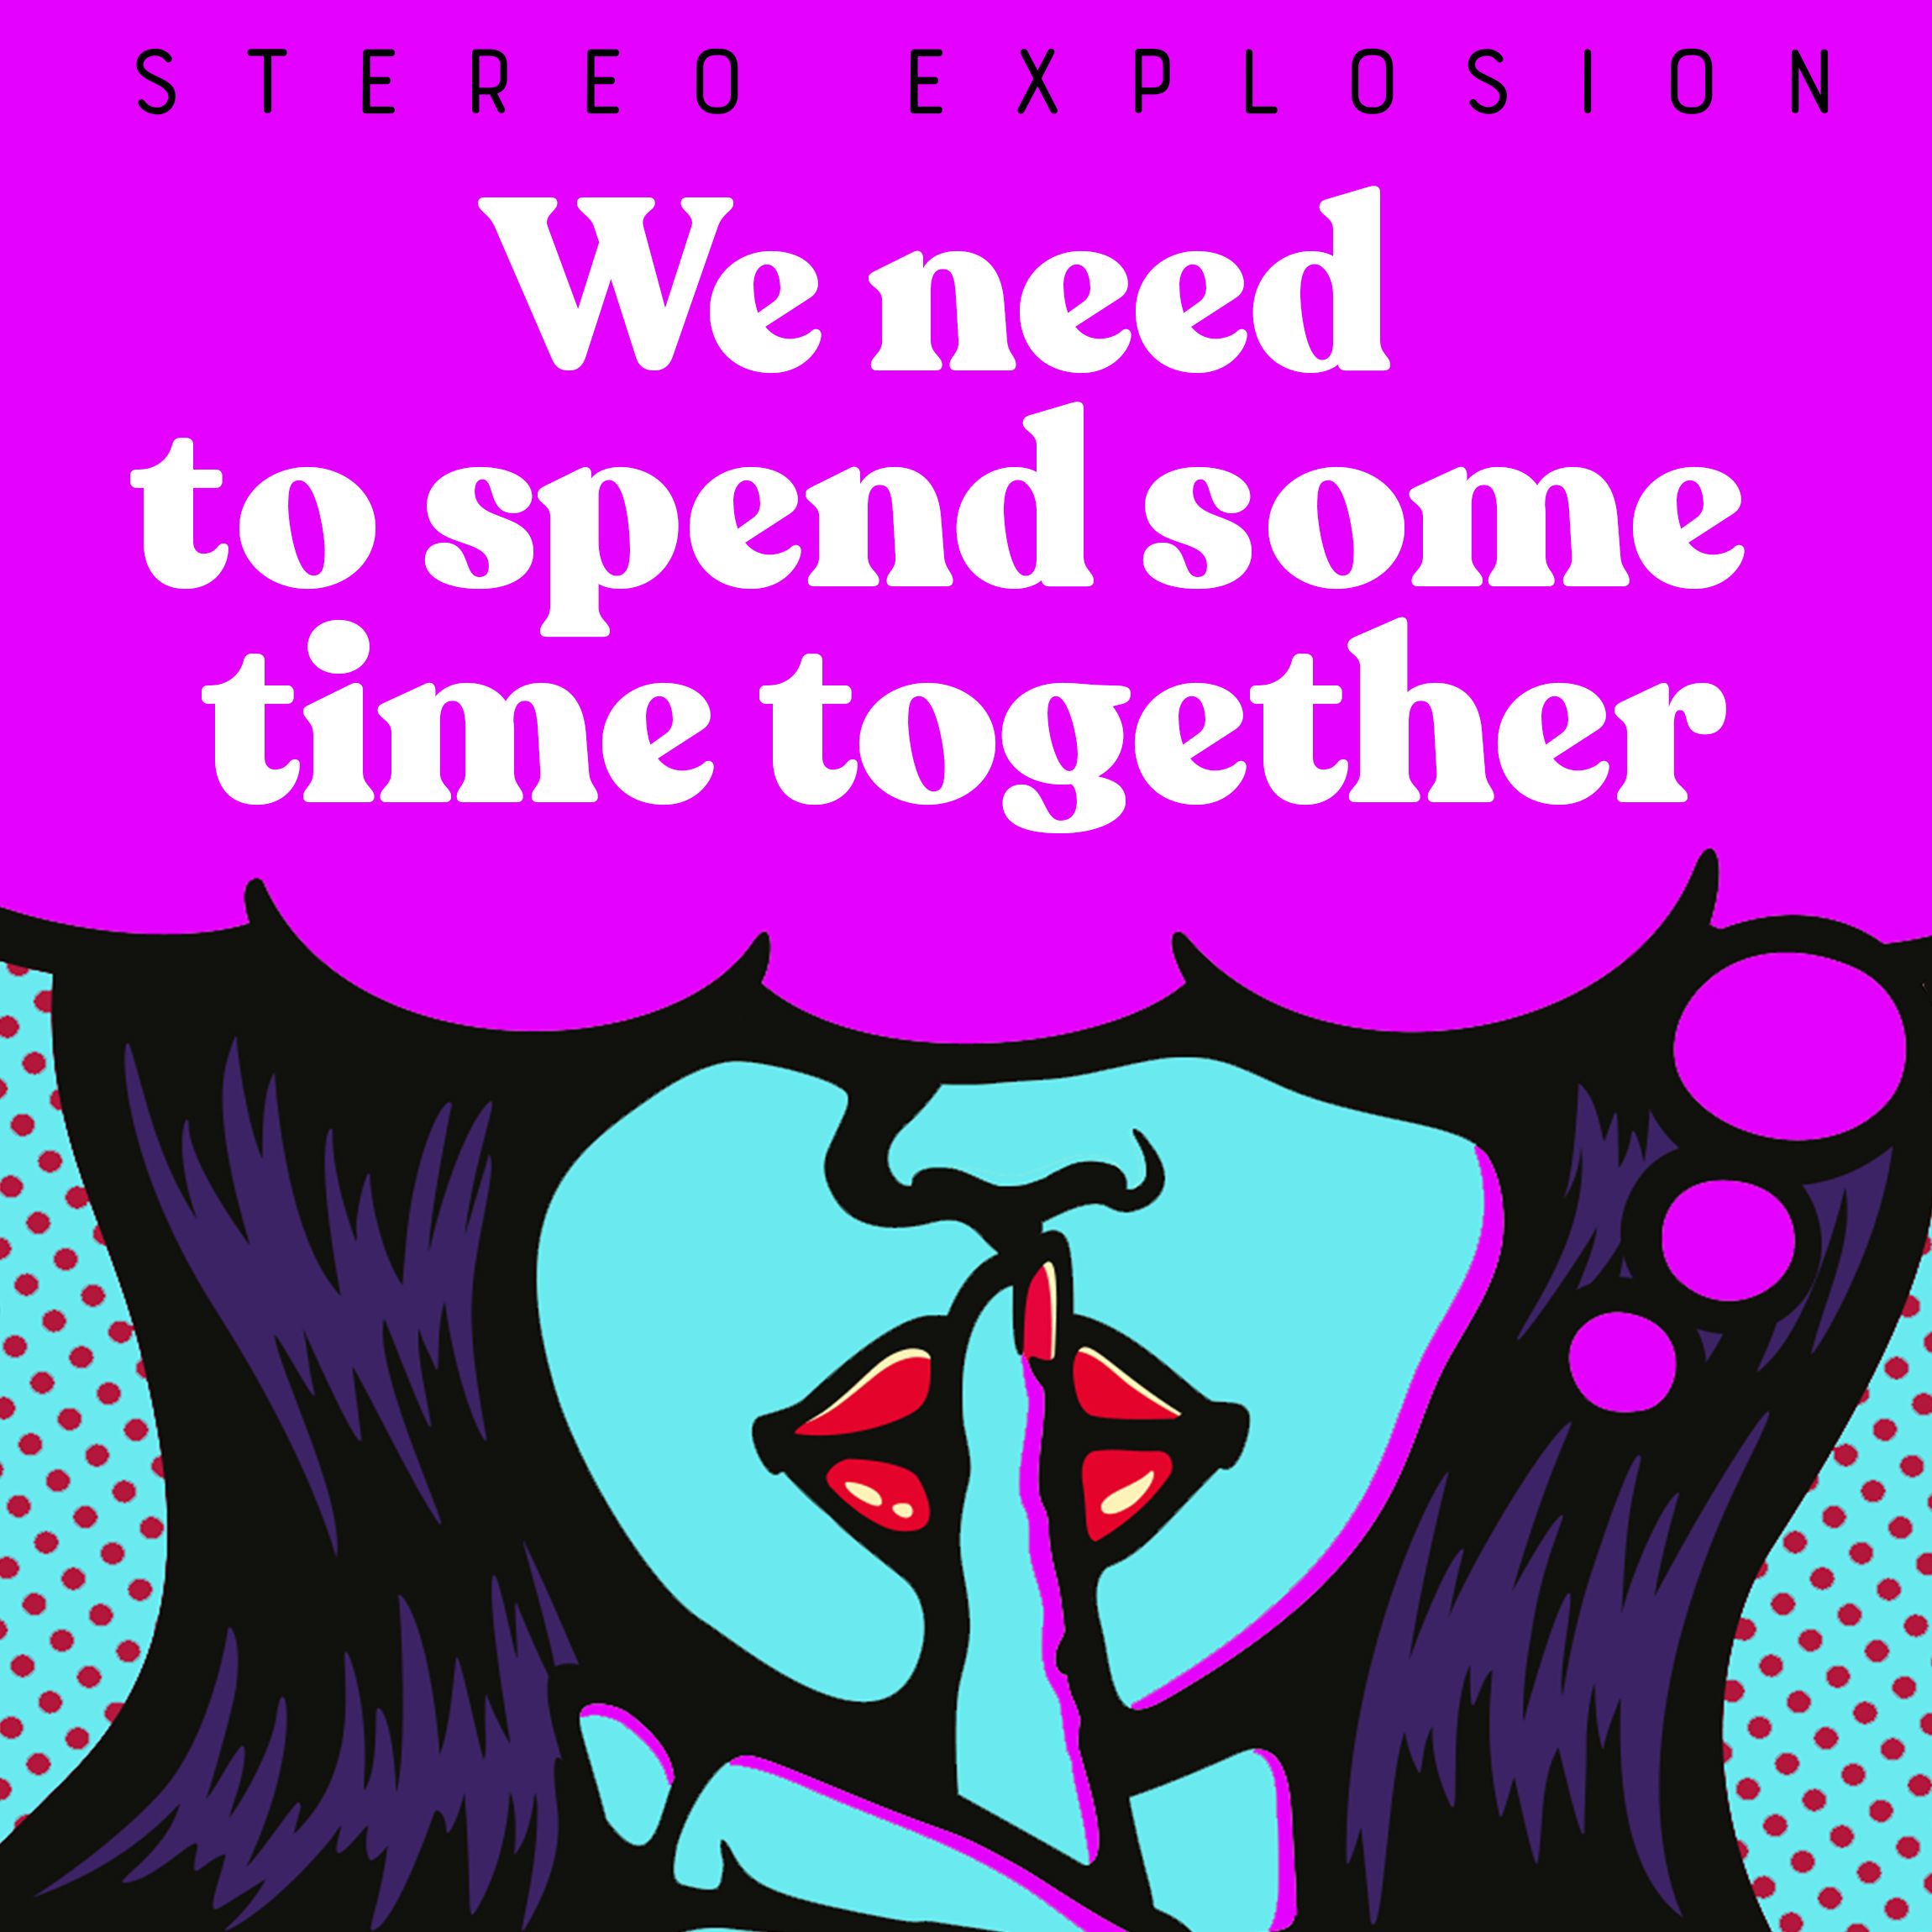 Stereo Explosion – “We need to spend some time together”